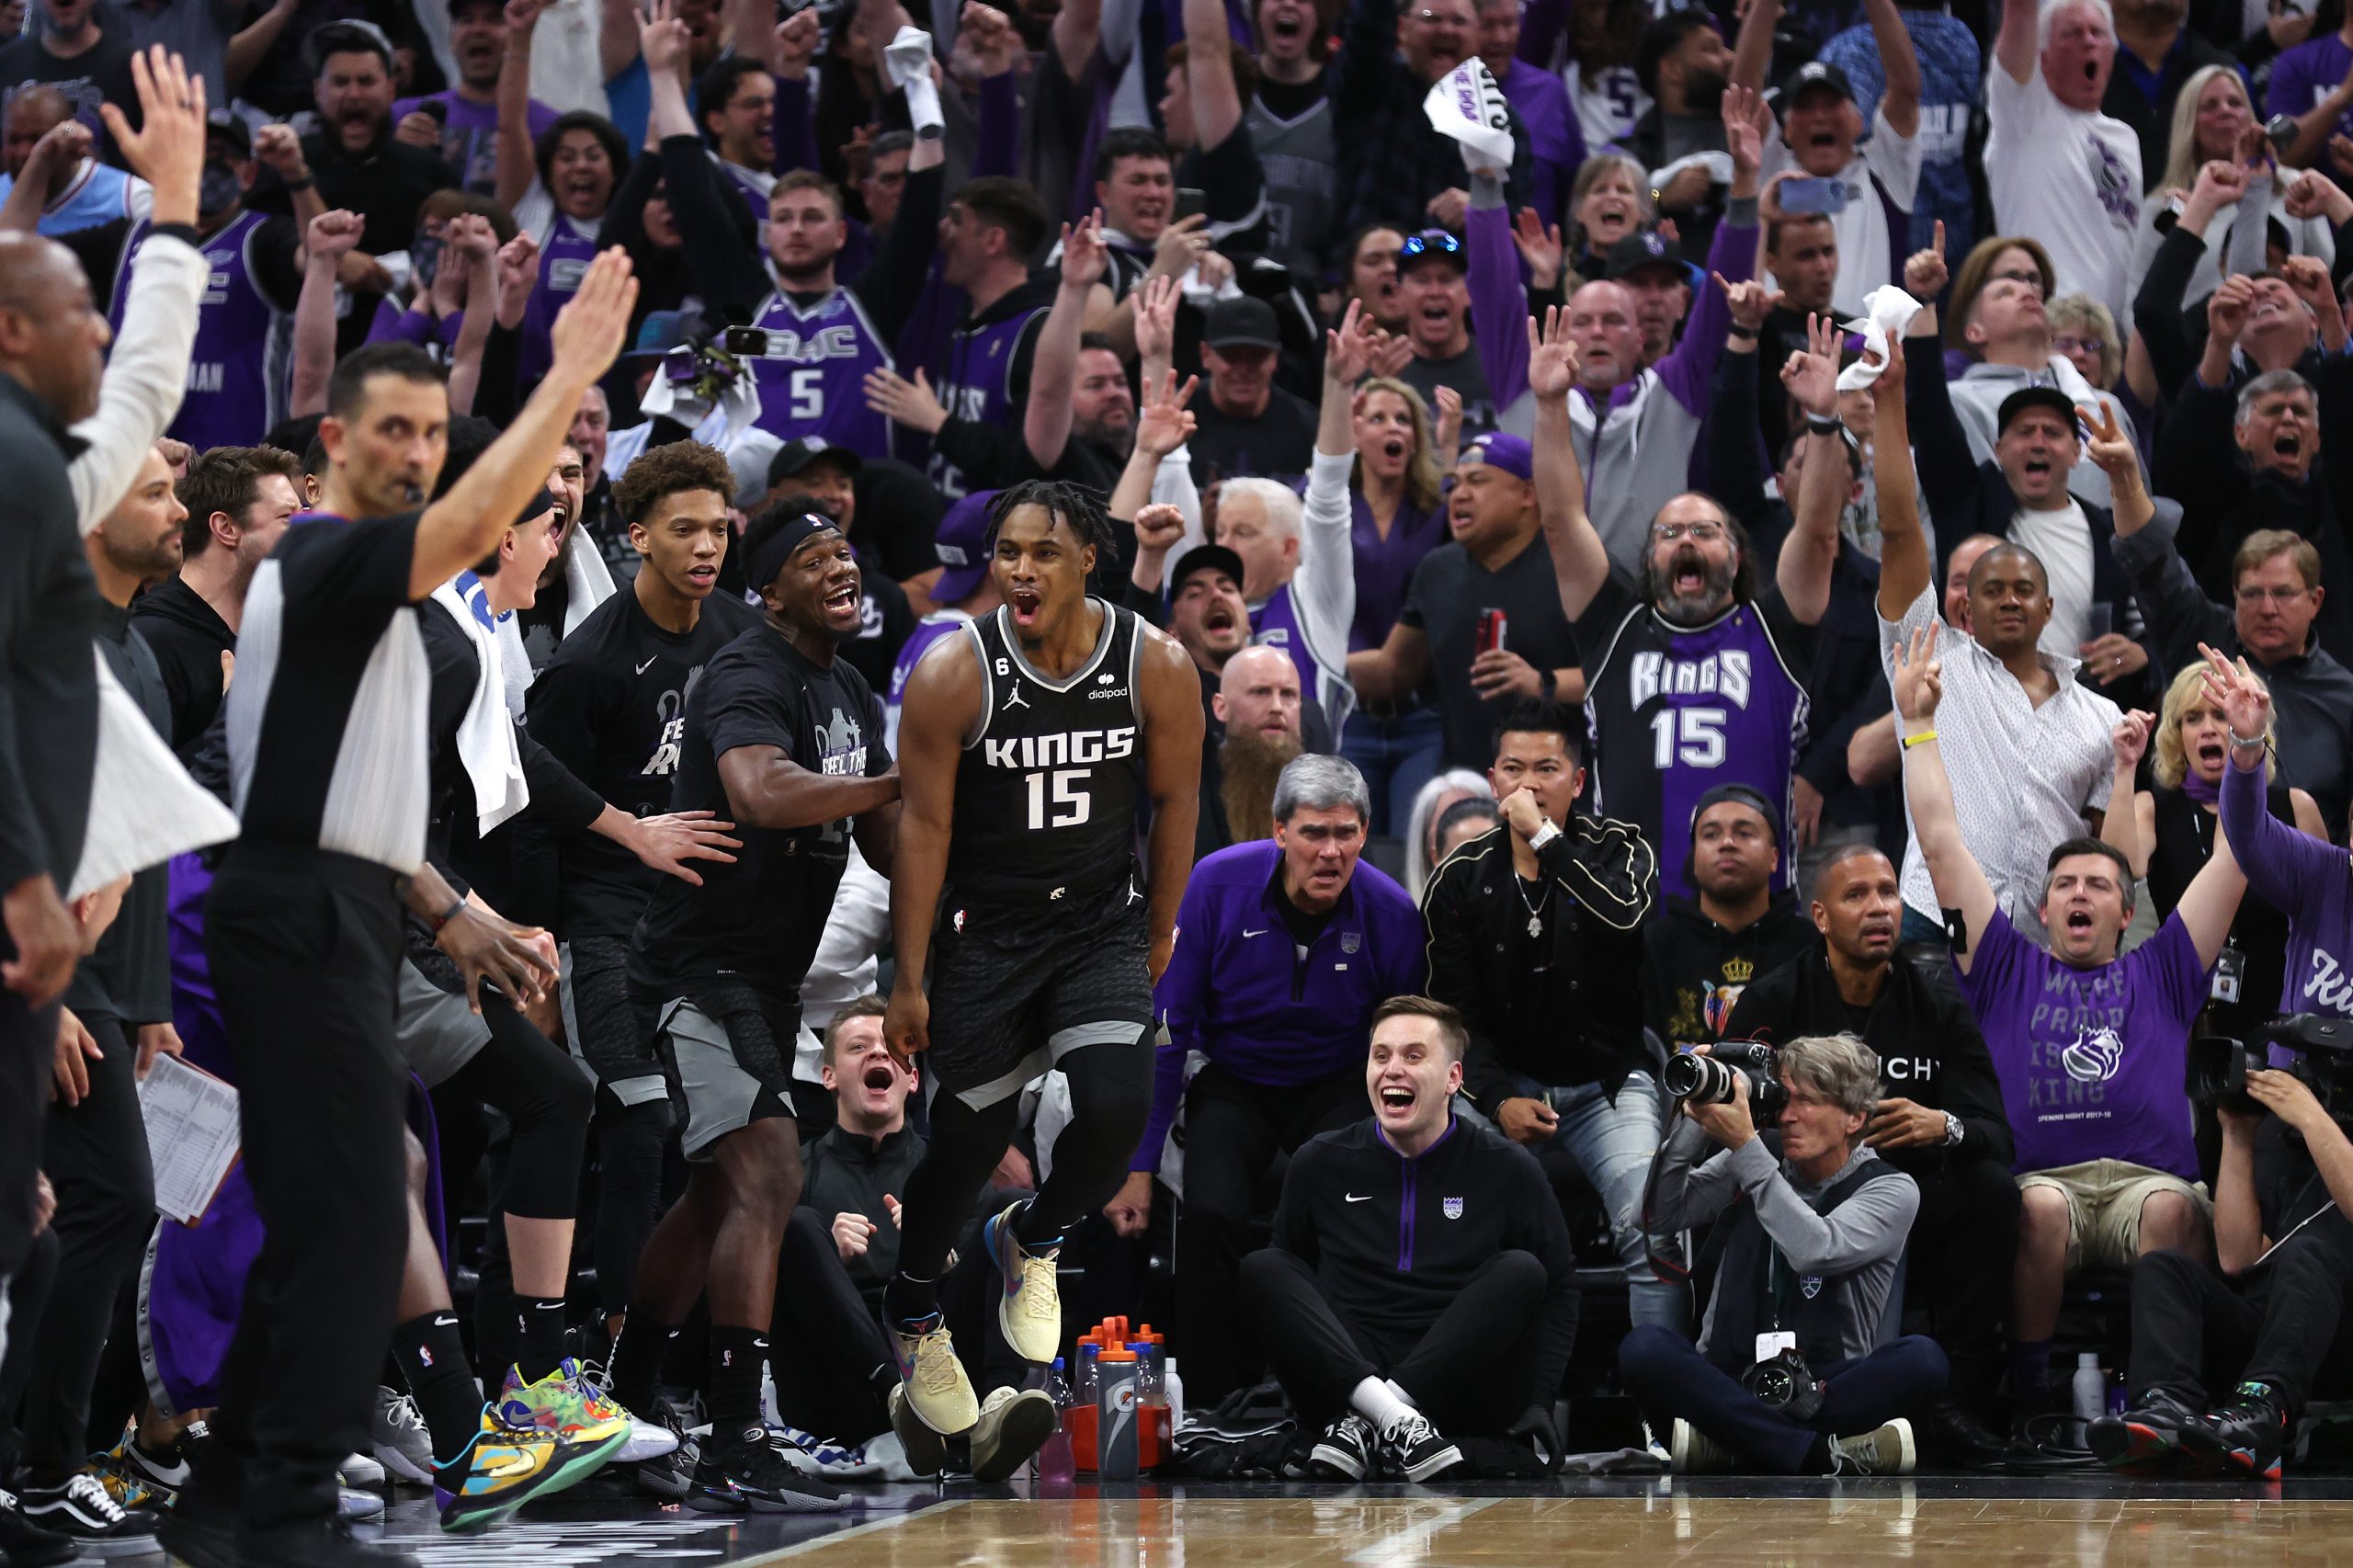 Green ejected as Kings continue to rule over Warriors